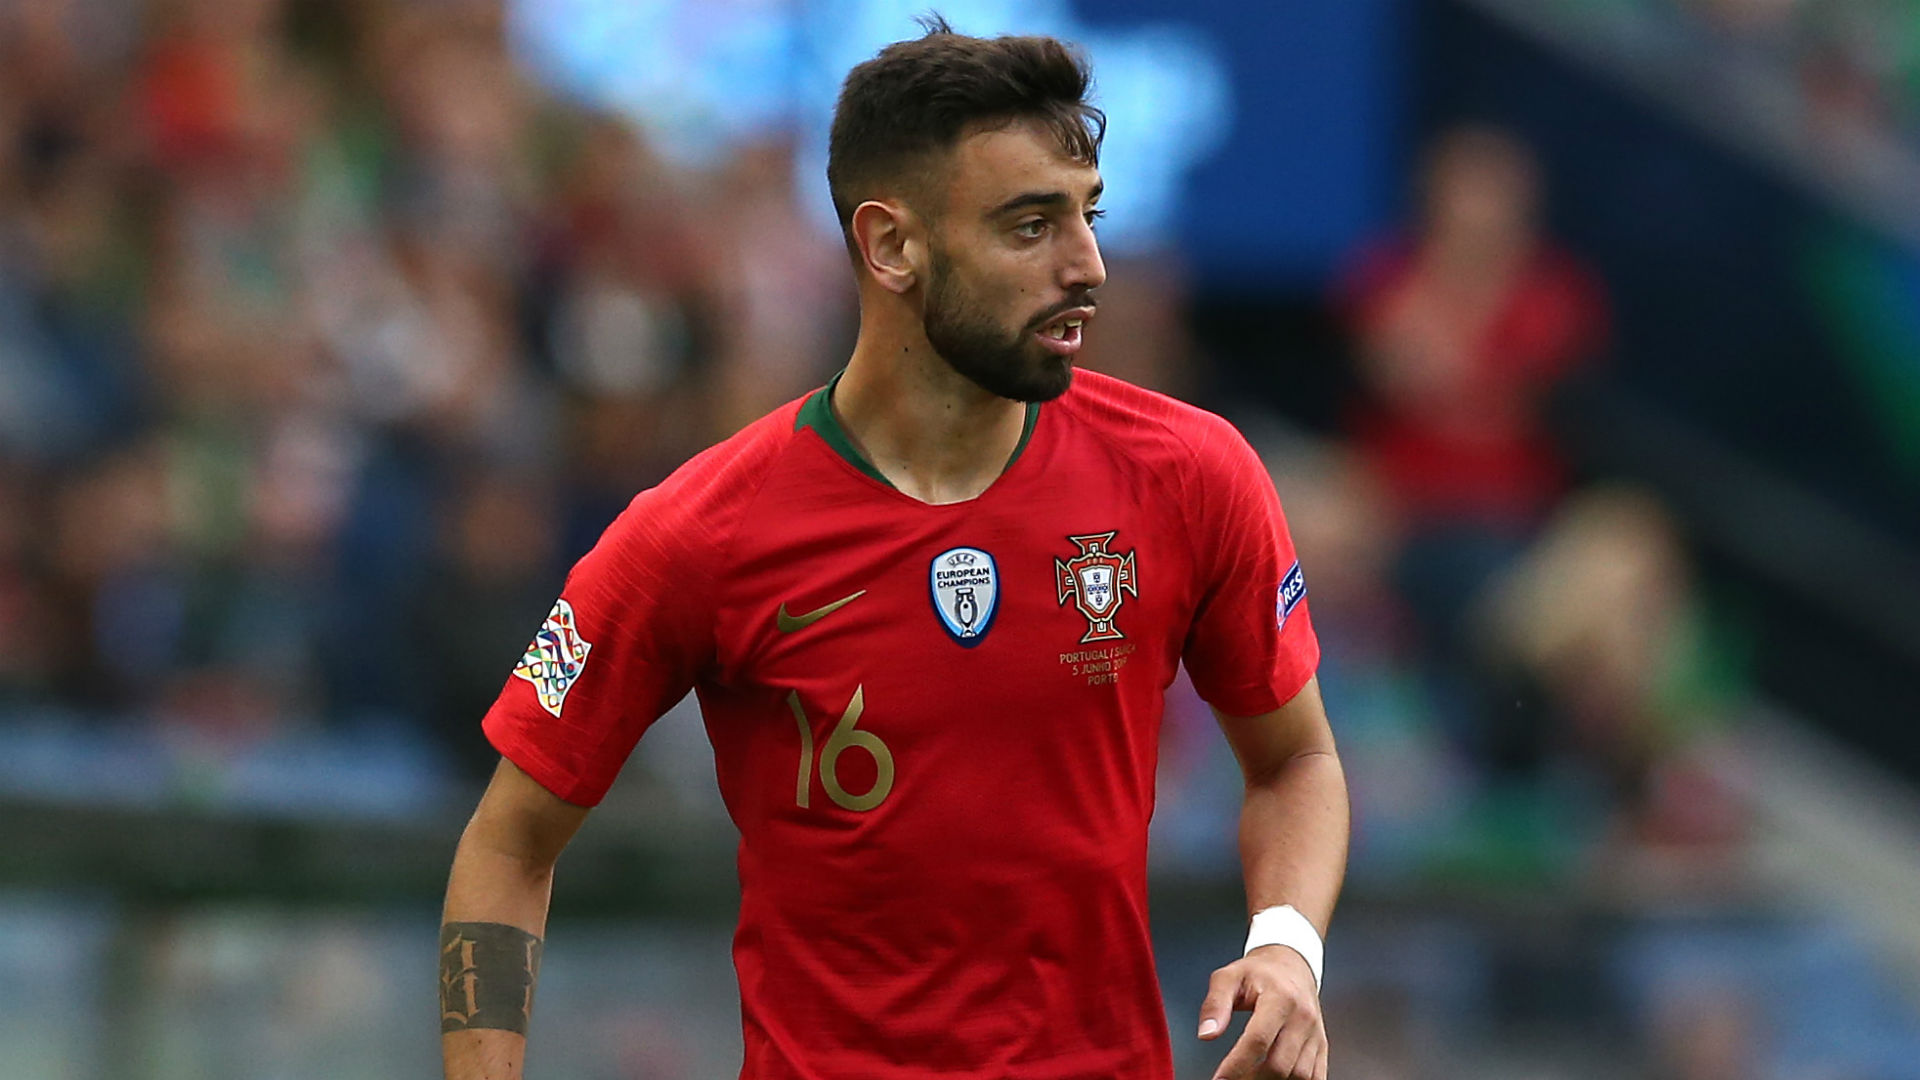 Bruno Fernandes is reportedly Manchester United's primary transfer target, but Ole Gunnar Solskjaer has no fresh update on the matter.